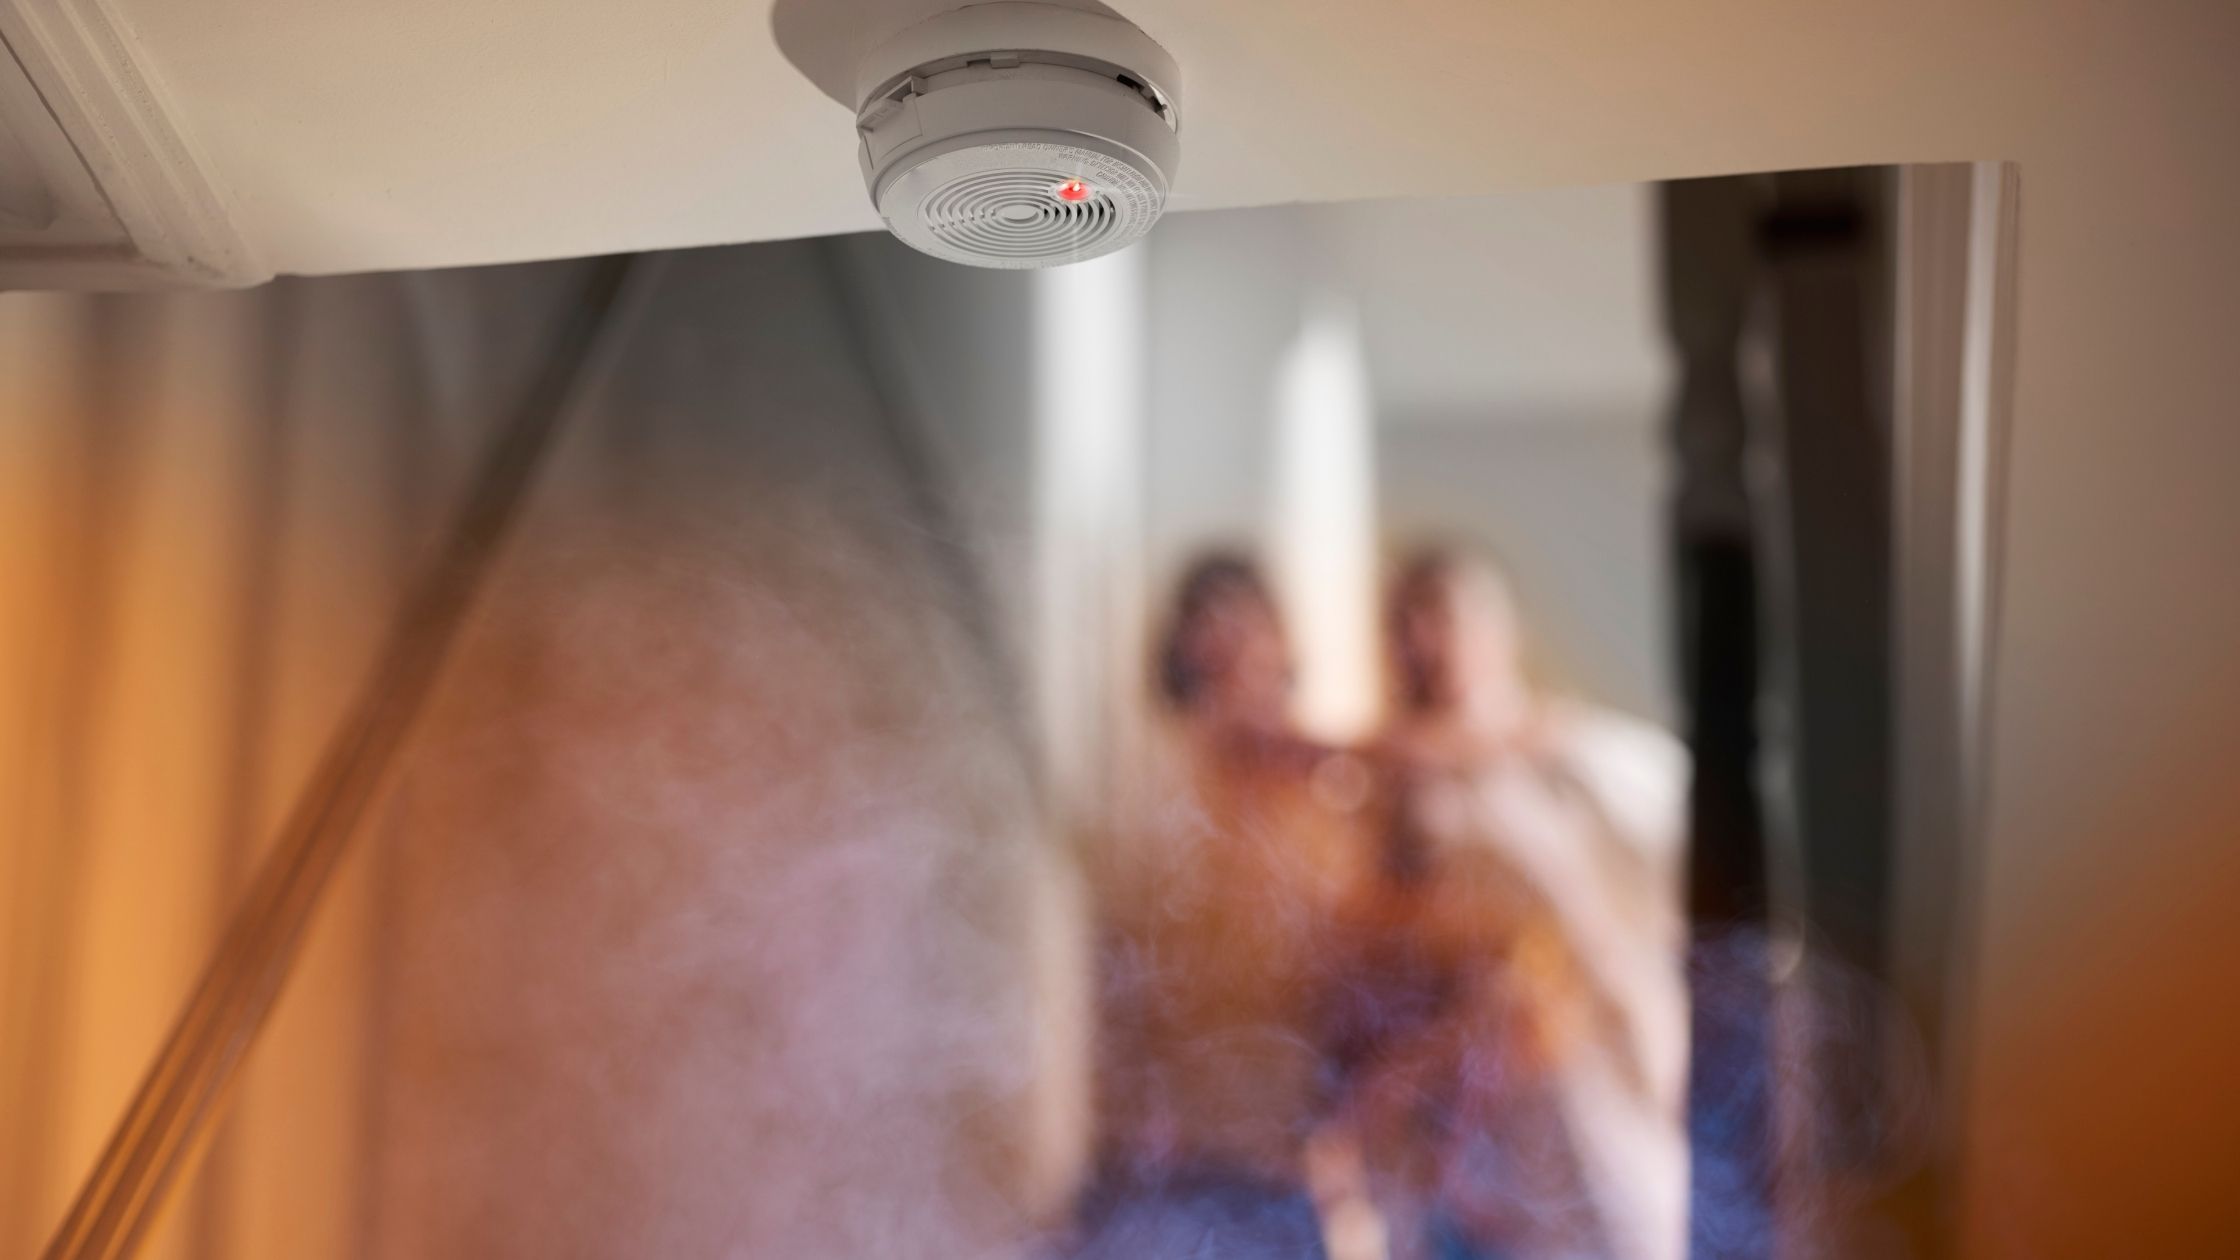 What Causes Intermittent Smoke Alarm Beeping or Chirping